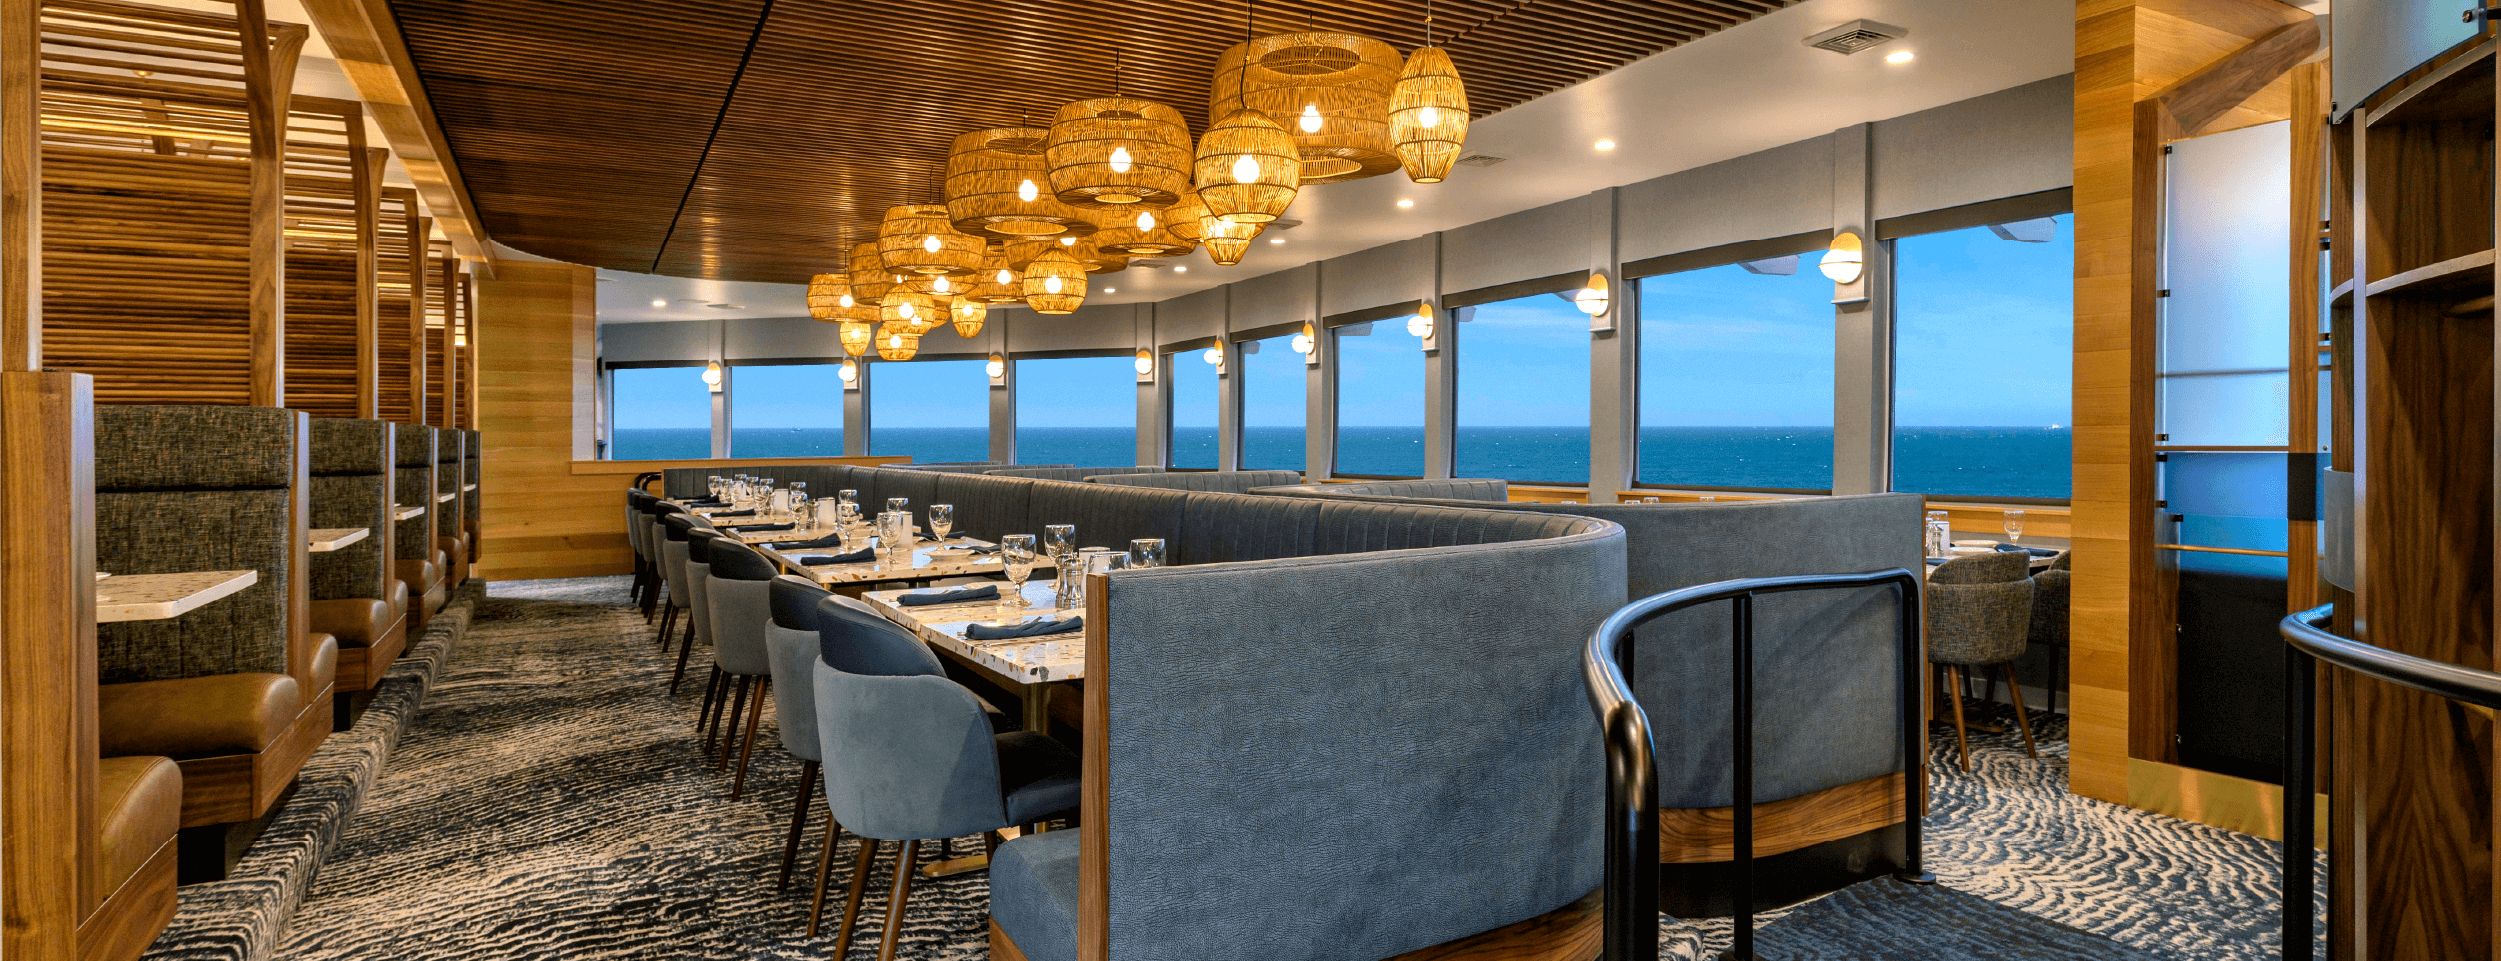 Georgie's restaurant interior featuring a full wall of windows looking over the Pacific ocean and rows of individual tables and booth seating.